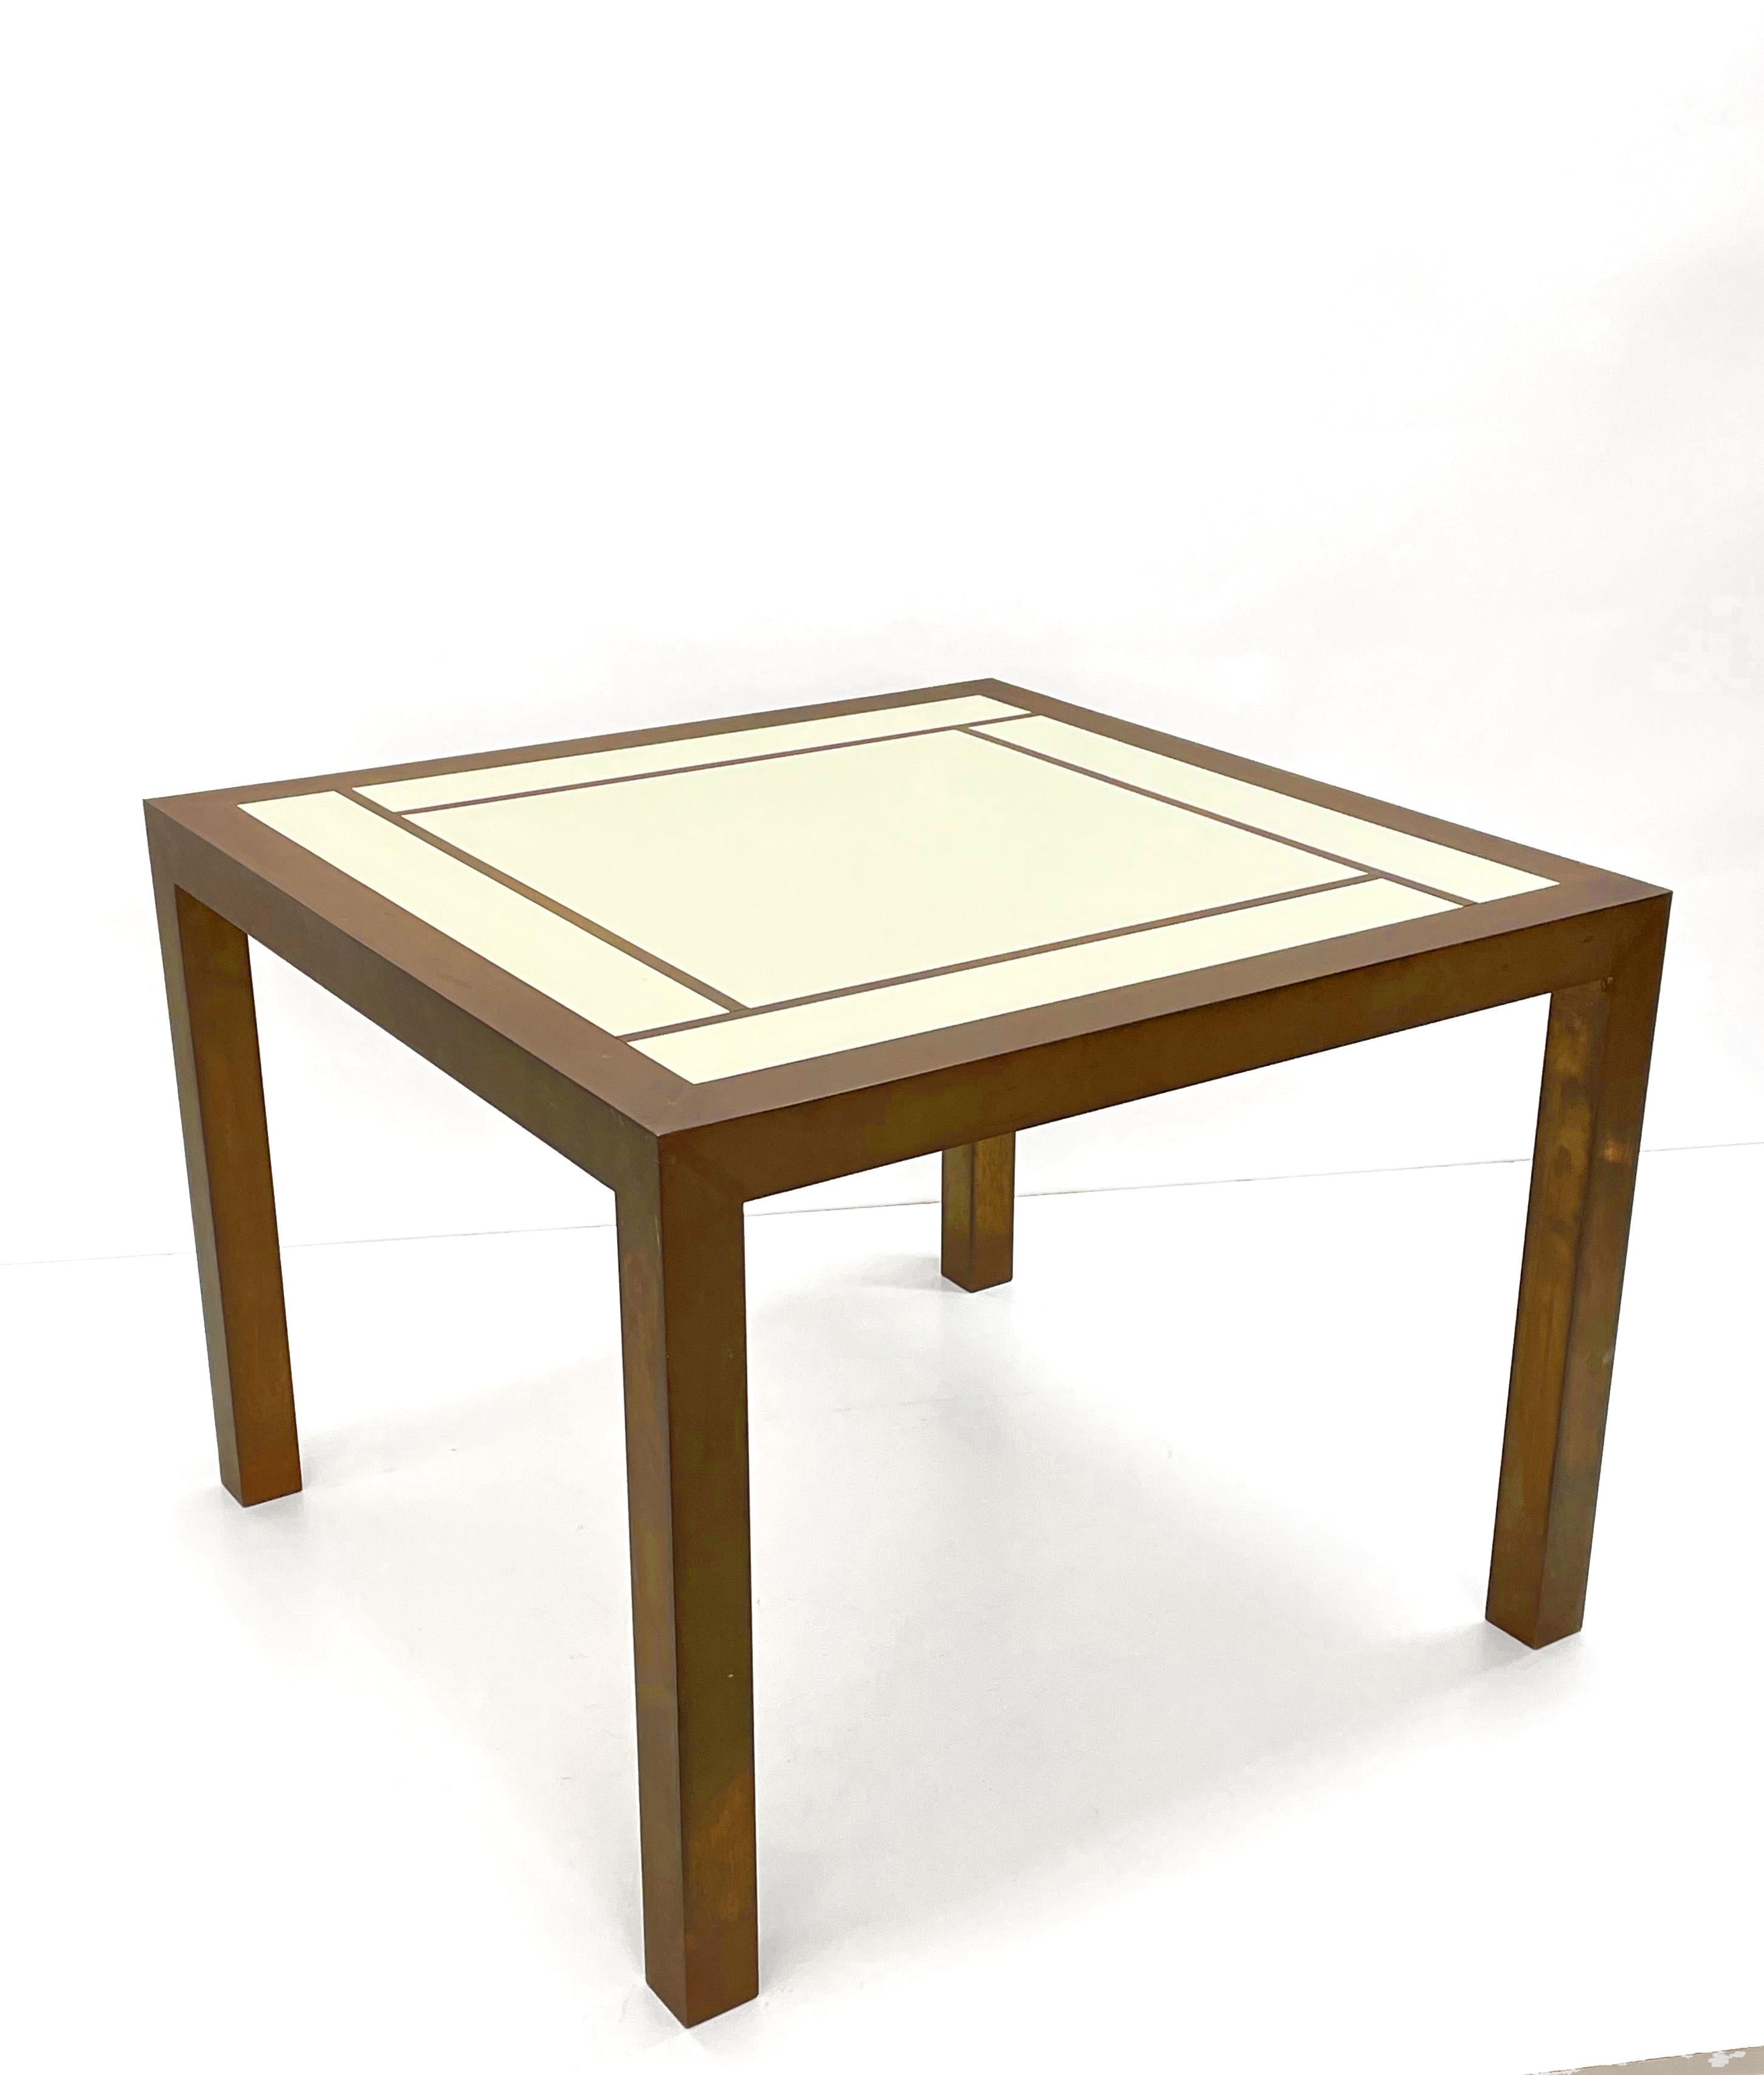 Midcentury Square Brass and Formica Italian Coffee Table Willy Rizzo Style 1970s For Sale 1